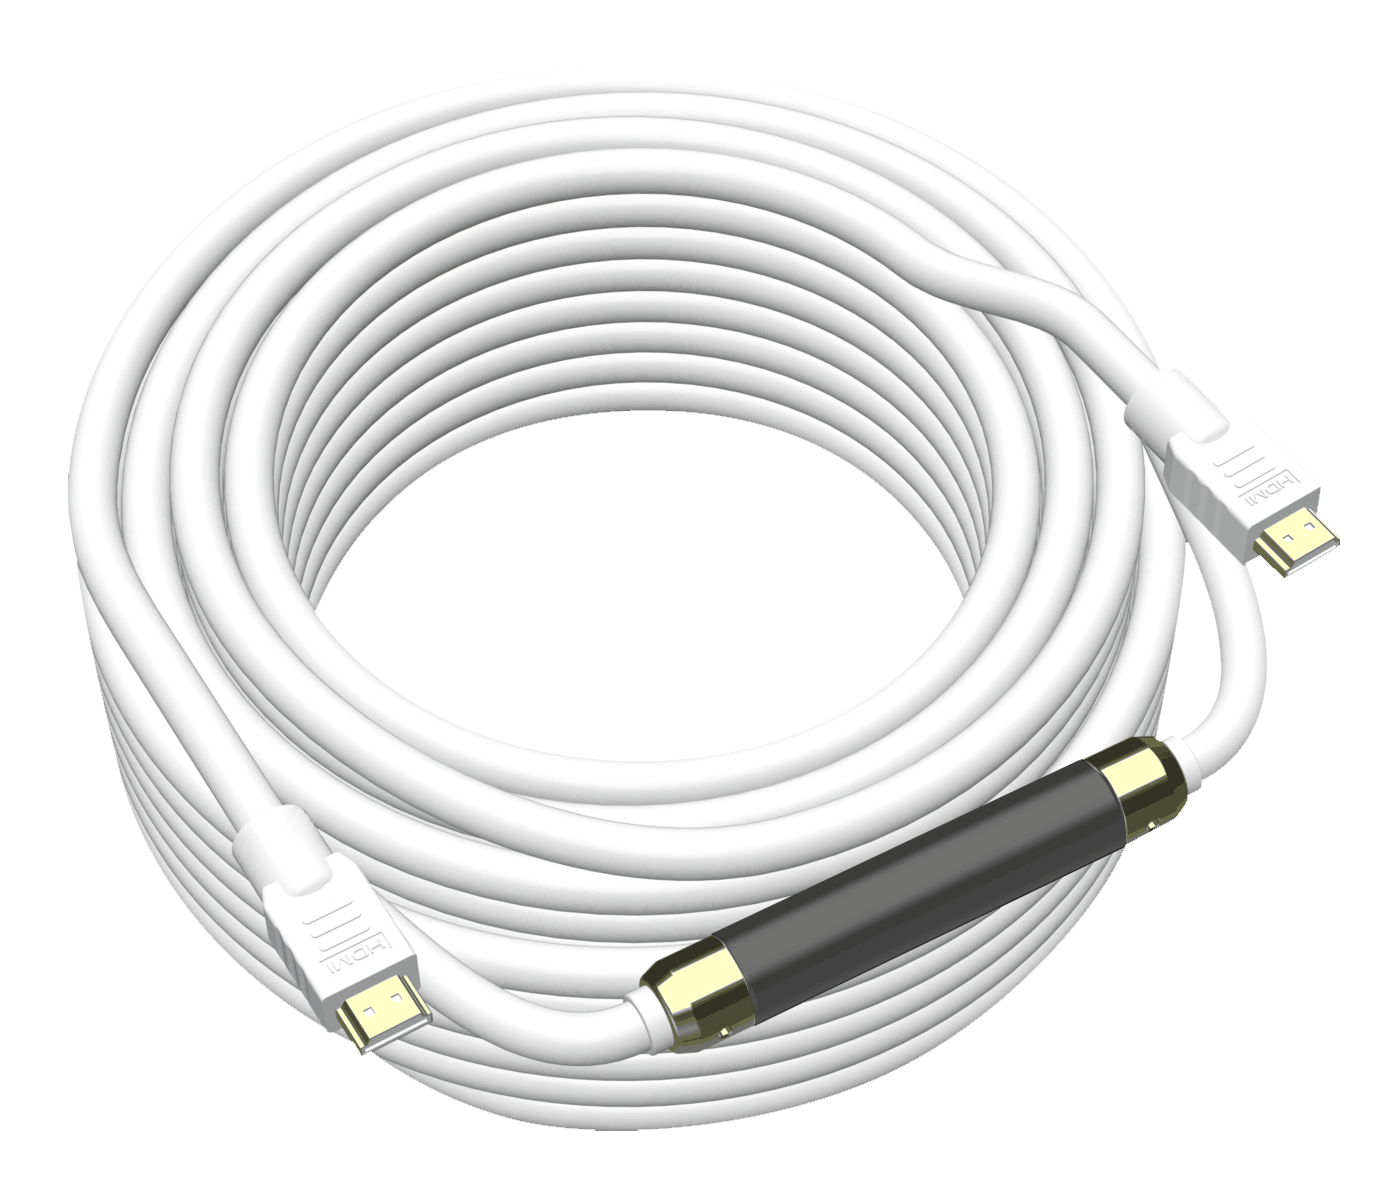 Vision 900057575 50 cm HDMI Cable With Adapter White